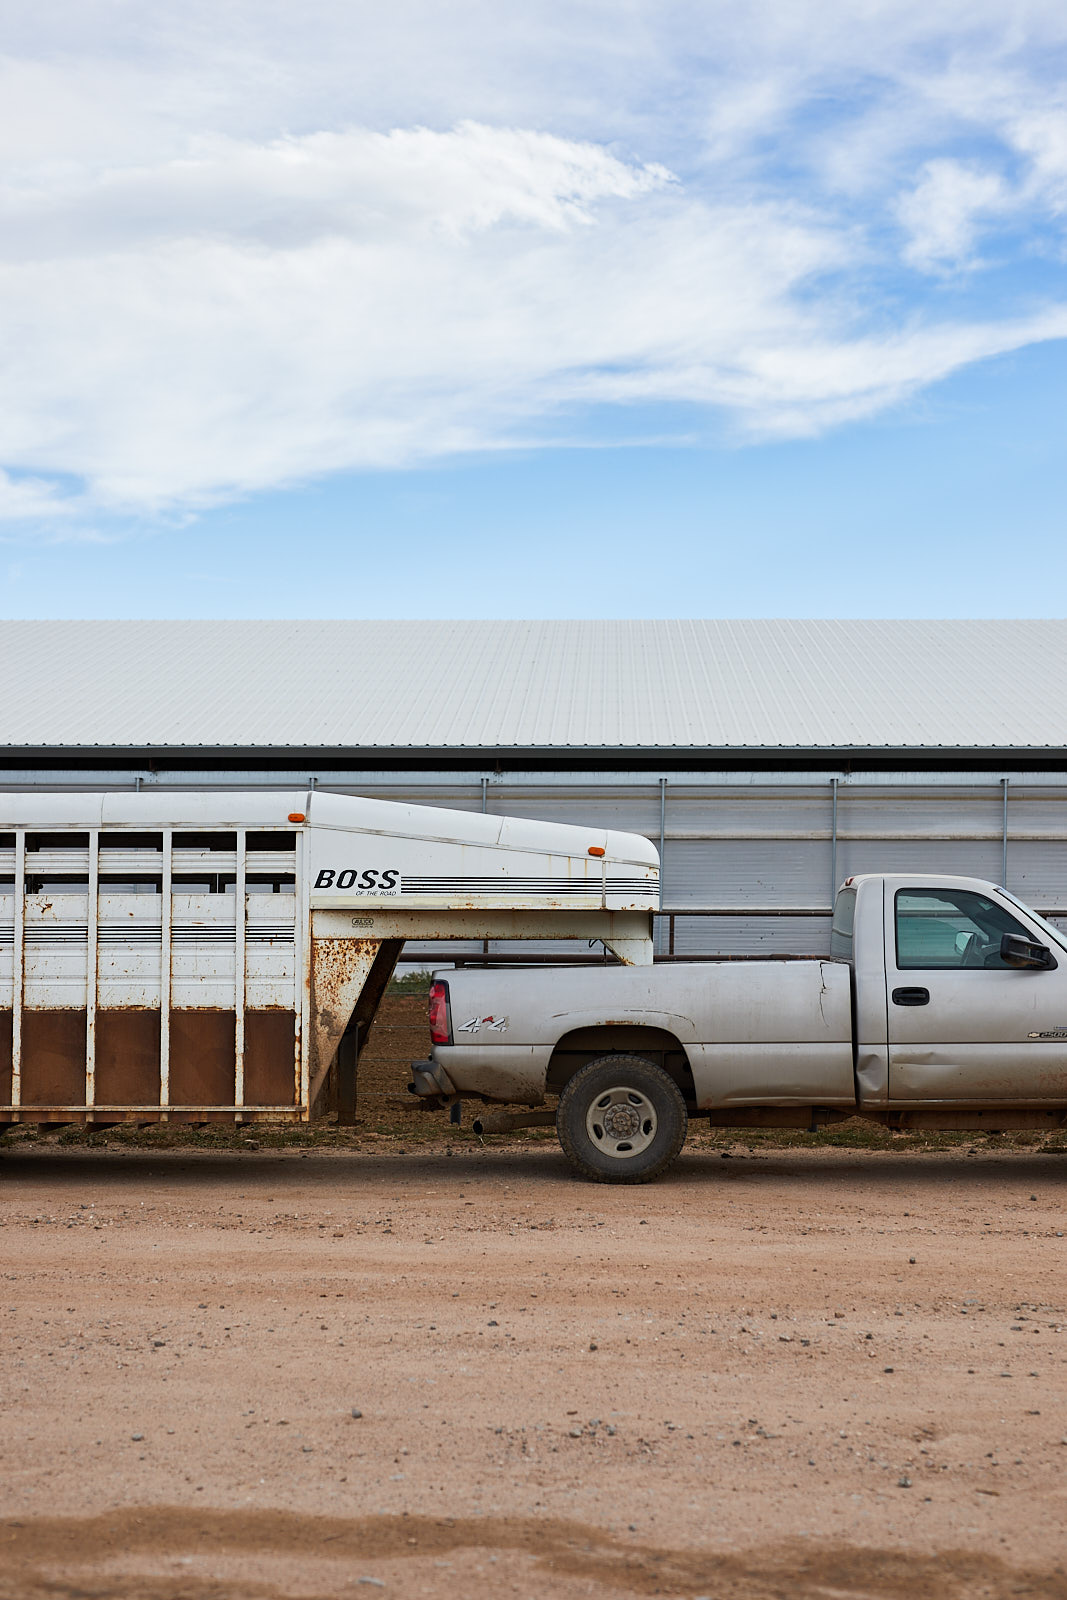 Trailer attached to truck at Morning Fresh Dairy in Fort Collins, Colorado for Edible Magazine Denver - John Robson Editorial Photography